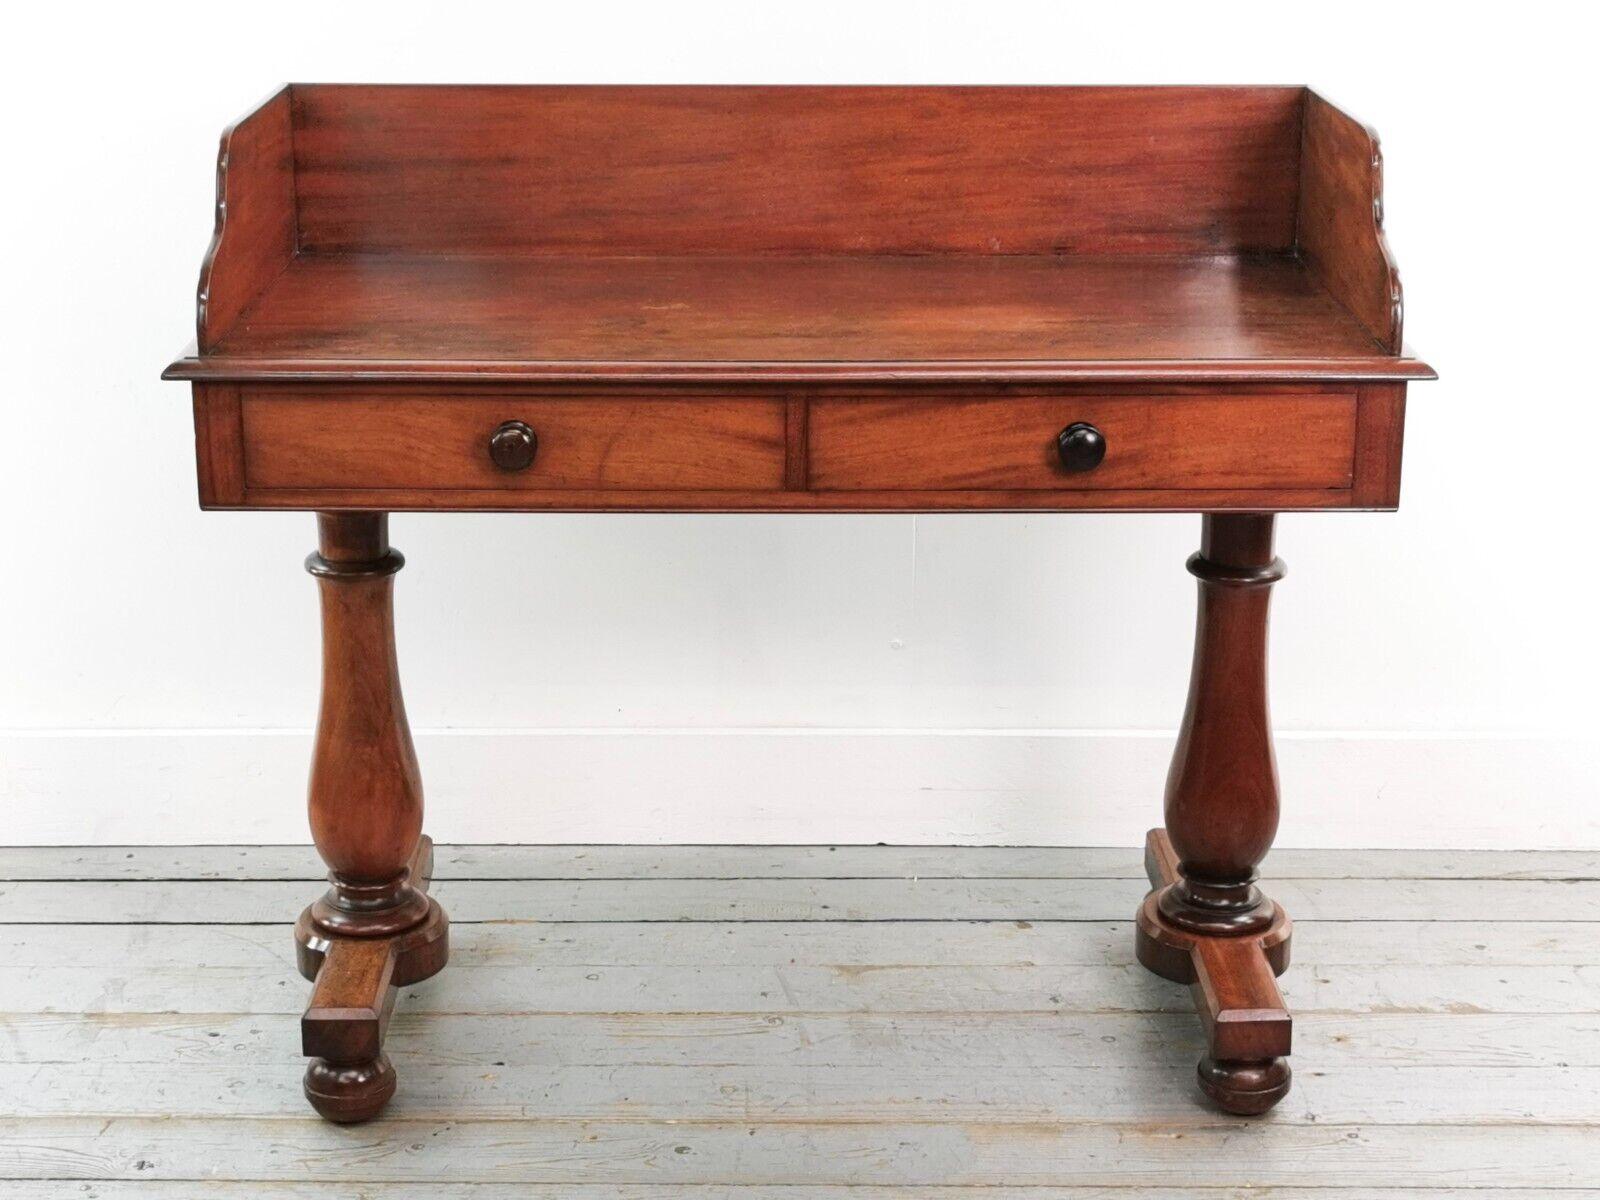 Victorian Washstand

A Victorian-era mahogany washstand with aesthetically pleasing legs. 

Featuring a rectangular top with gallery above two drawers with turned handles.

Perfect for use as a side table, kitchen table or desk.

Dimensions (cm):